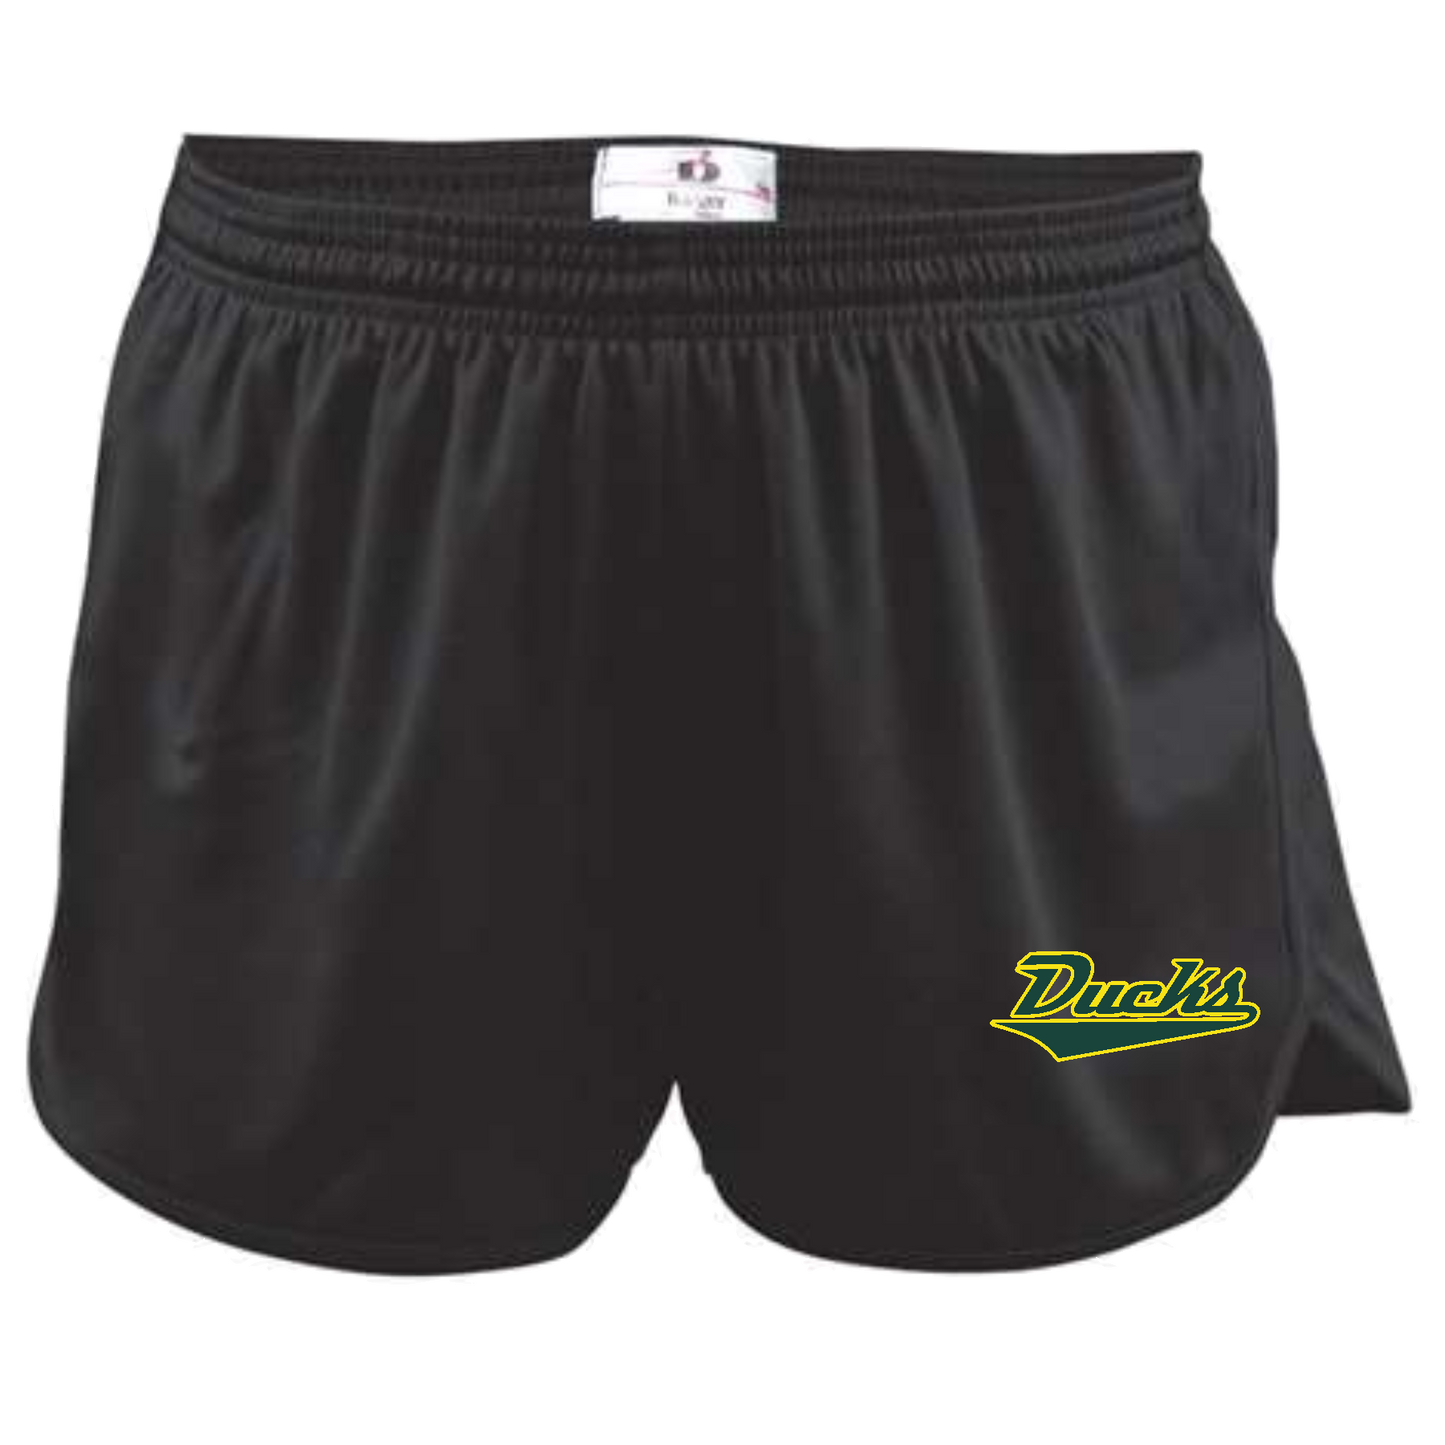 Alleson Athletic - Women's B-Core Track Shorts